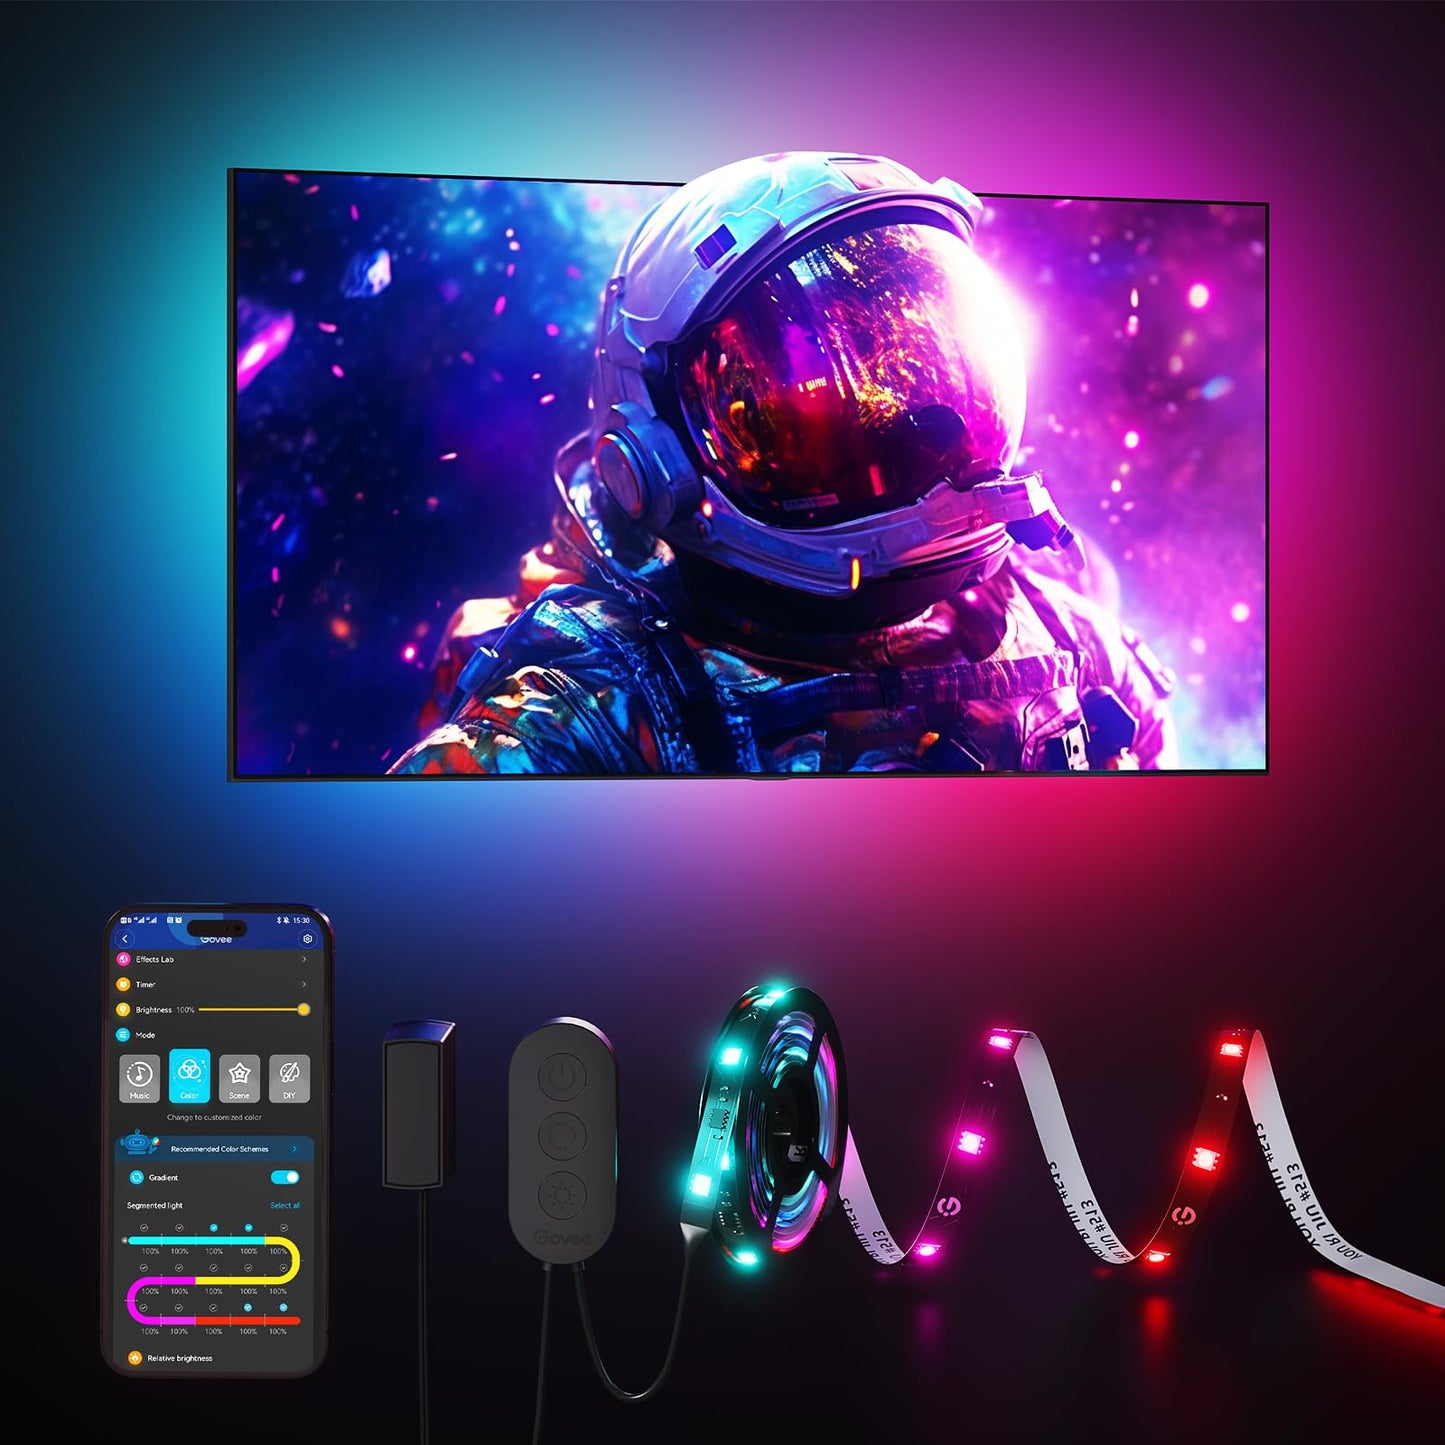 Govee TV LED Backlight, RGBIC LED Lights for TV, Smart TV LED Backlight for 40-50inch TVs, Music Sync, Wi-Fi Bluetooth & App Control, Works with Alexa & Google Assistant, 77 Scene Modes, Adapter